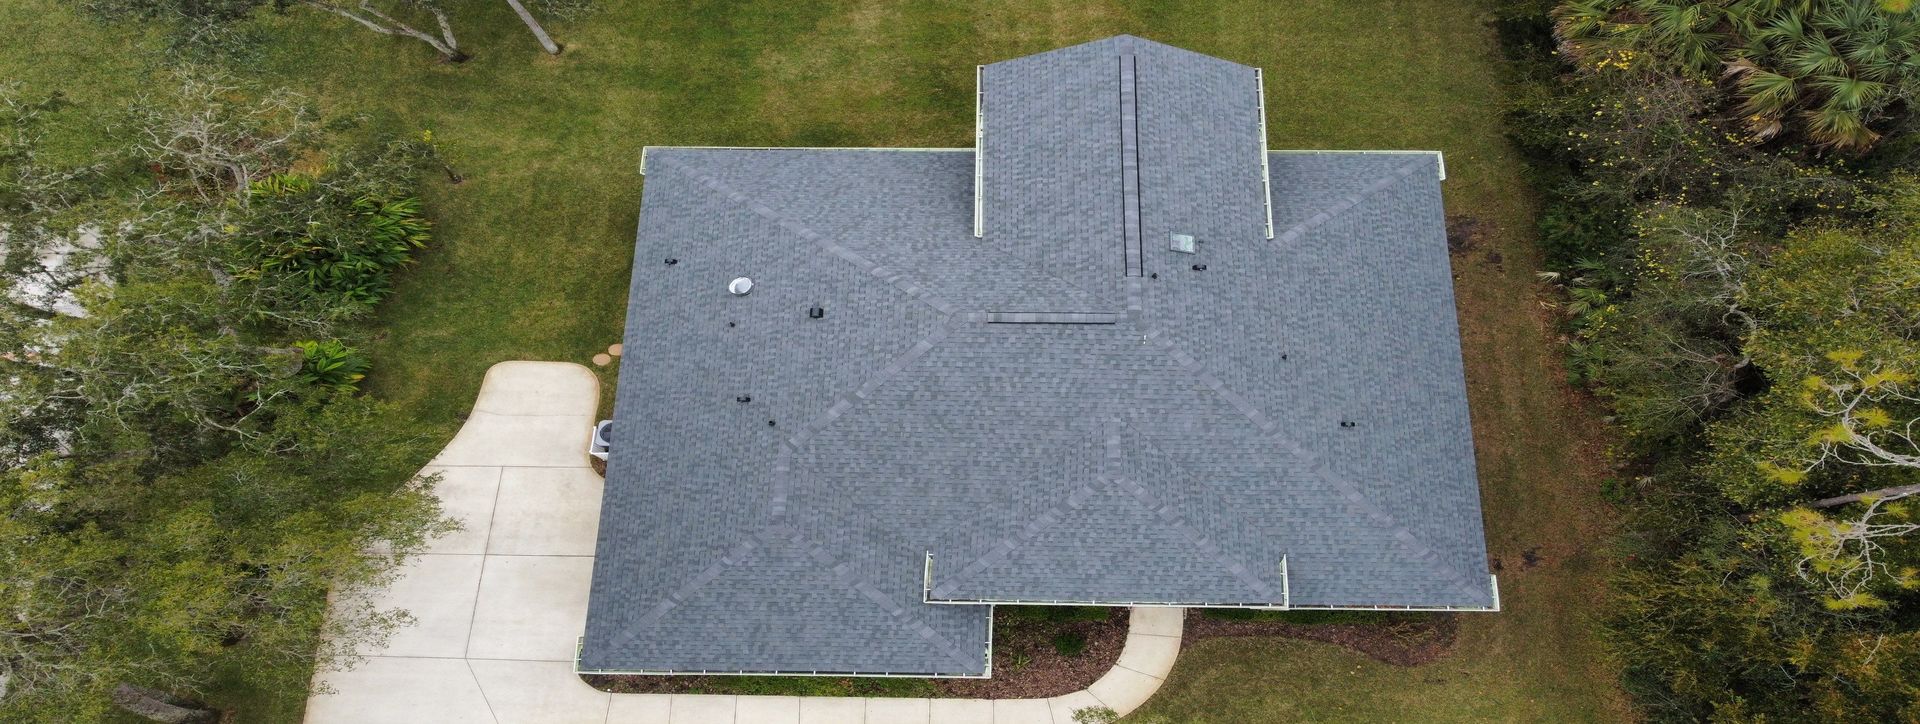 Overhead view of a shingled roof in the Greater Orlando area.